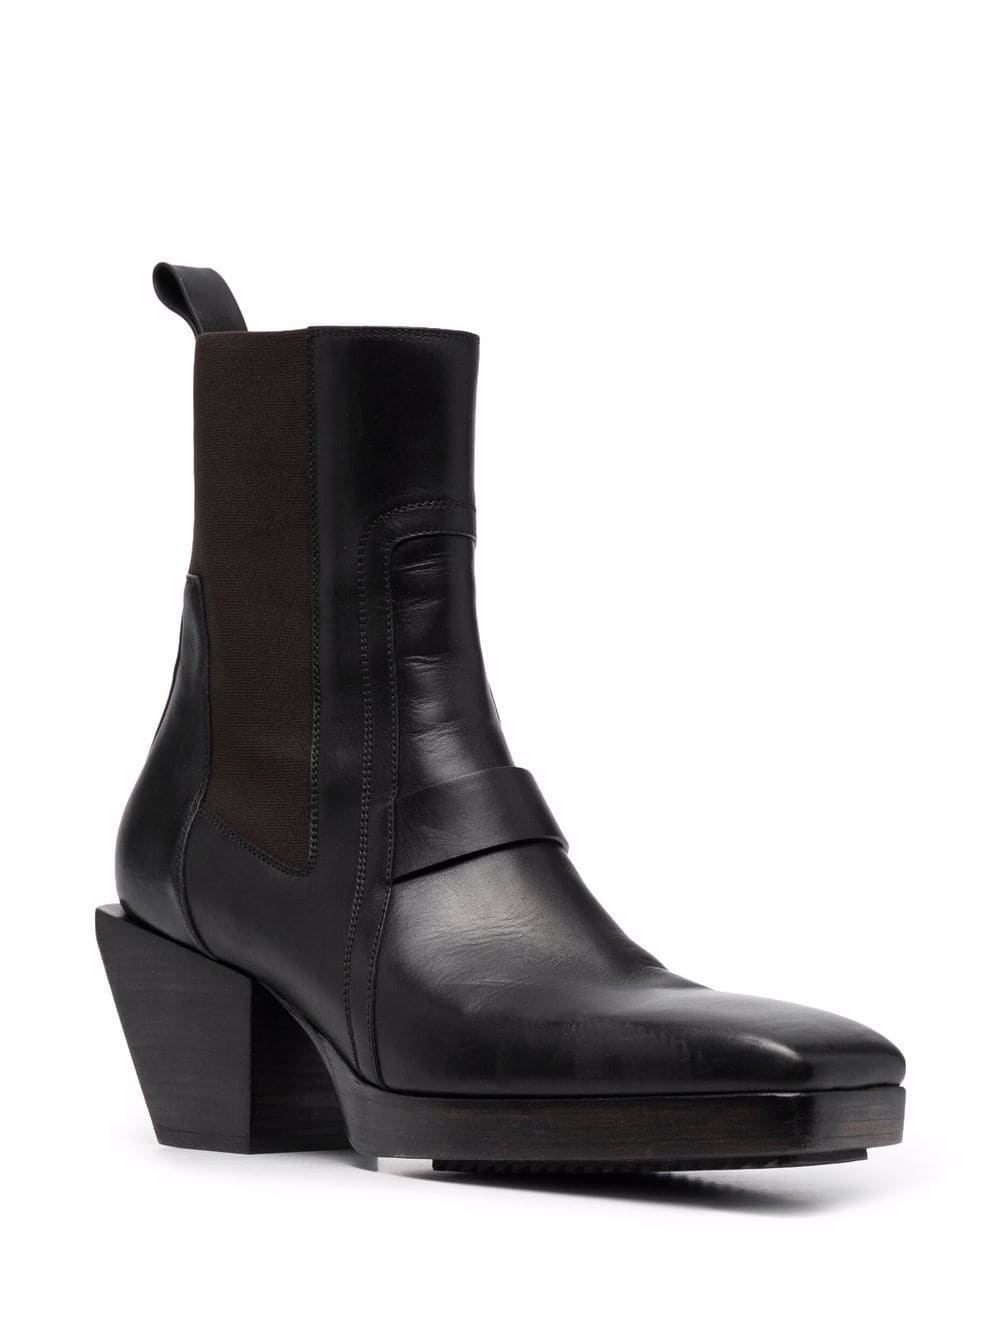 Rick Owens square-toe Leather Boots - Farfetch